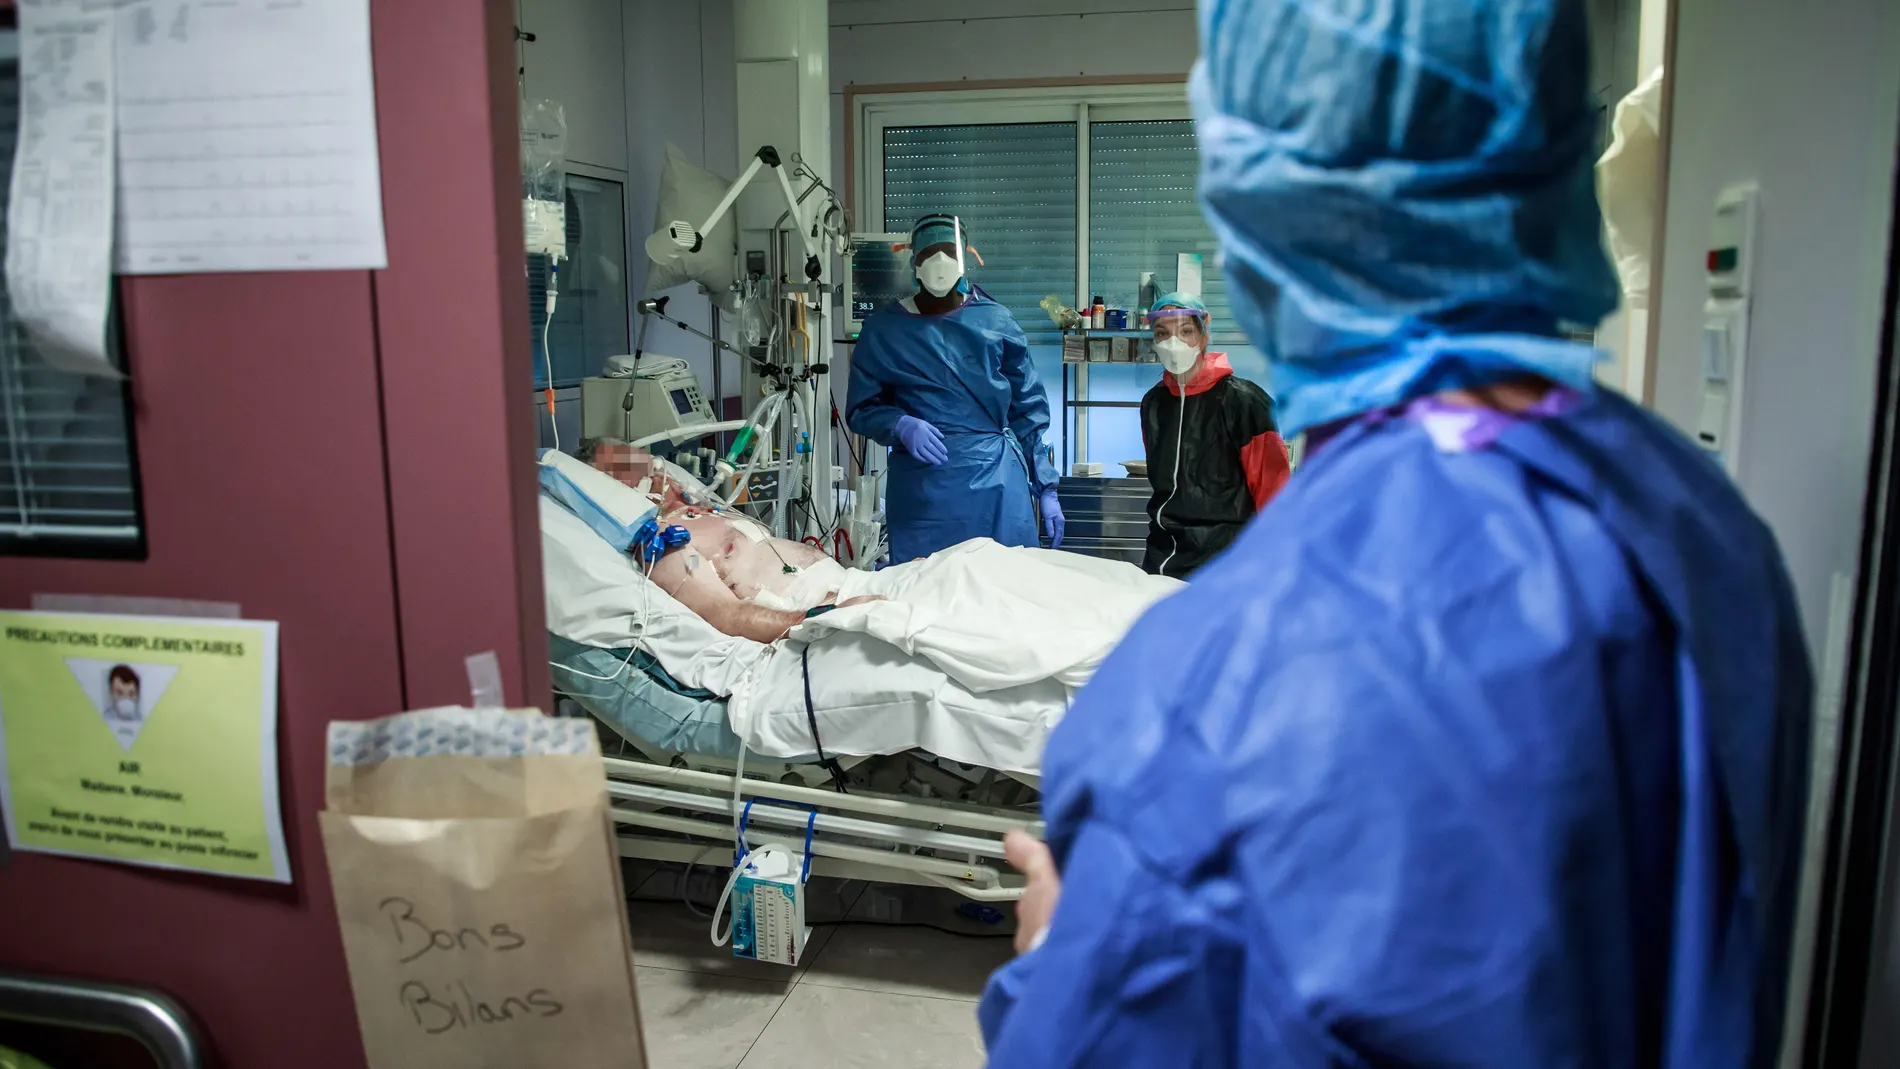 Night watch at the resuscitation intensive care unit of the Ambroise Pare clinic